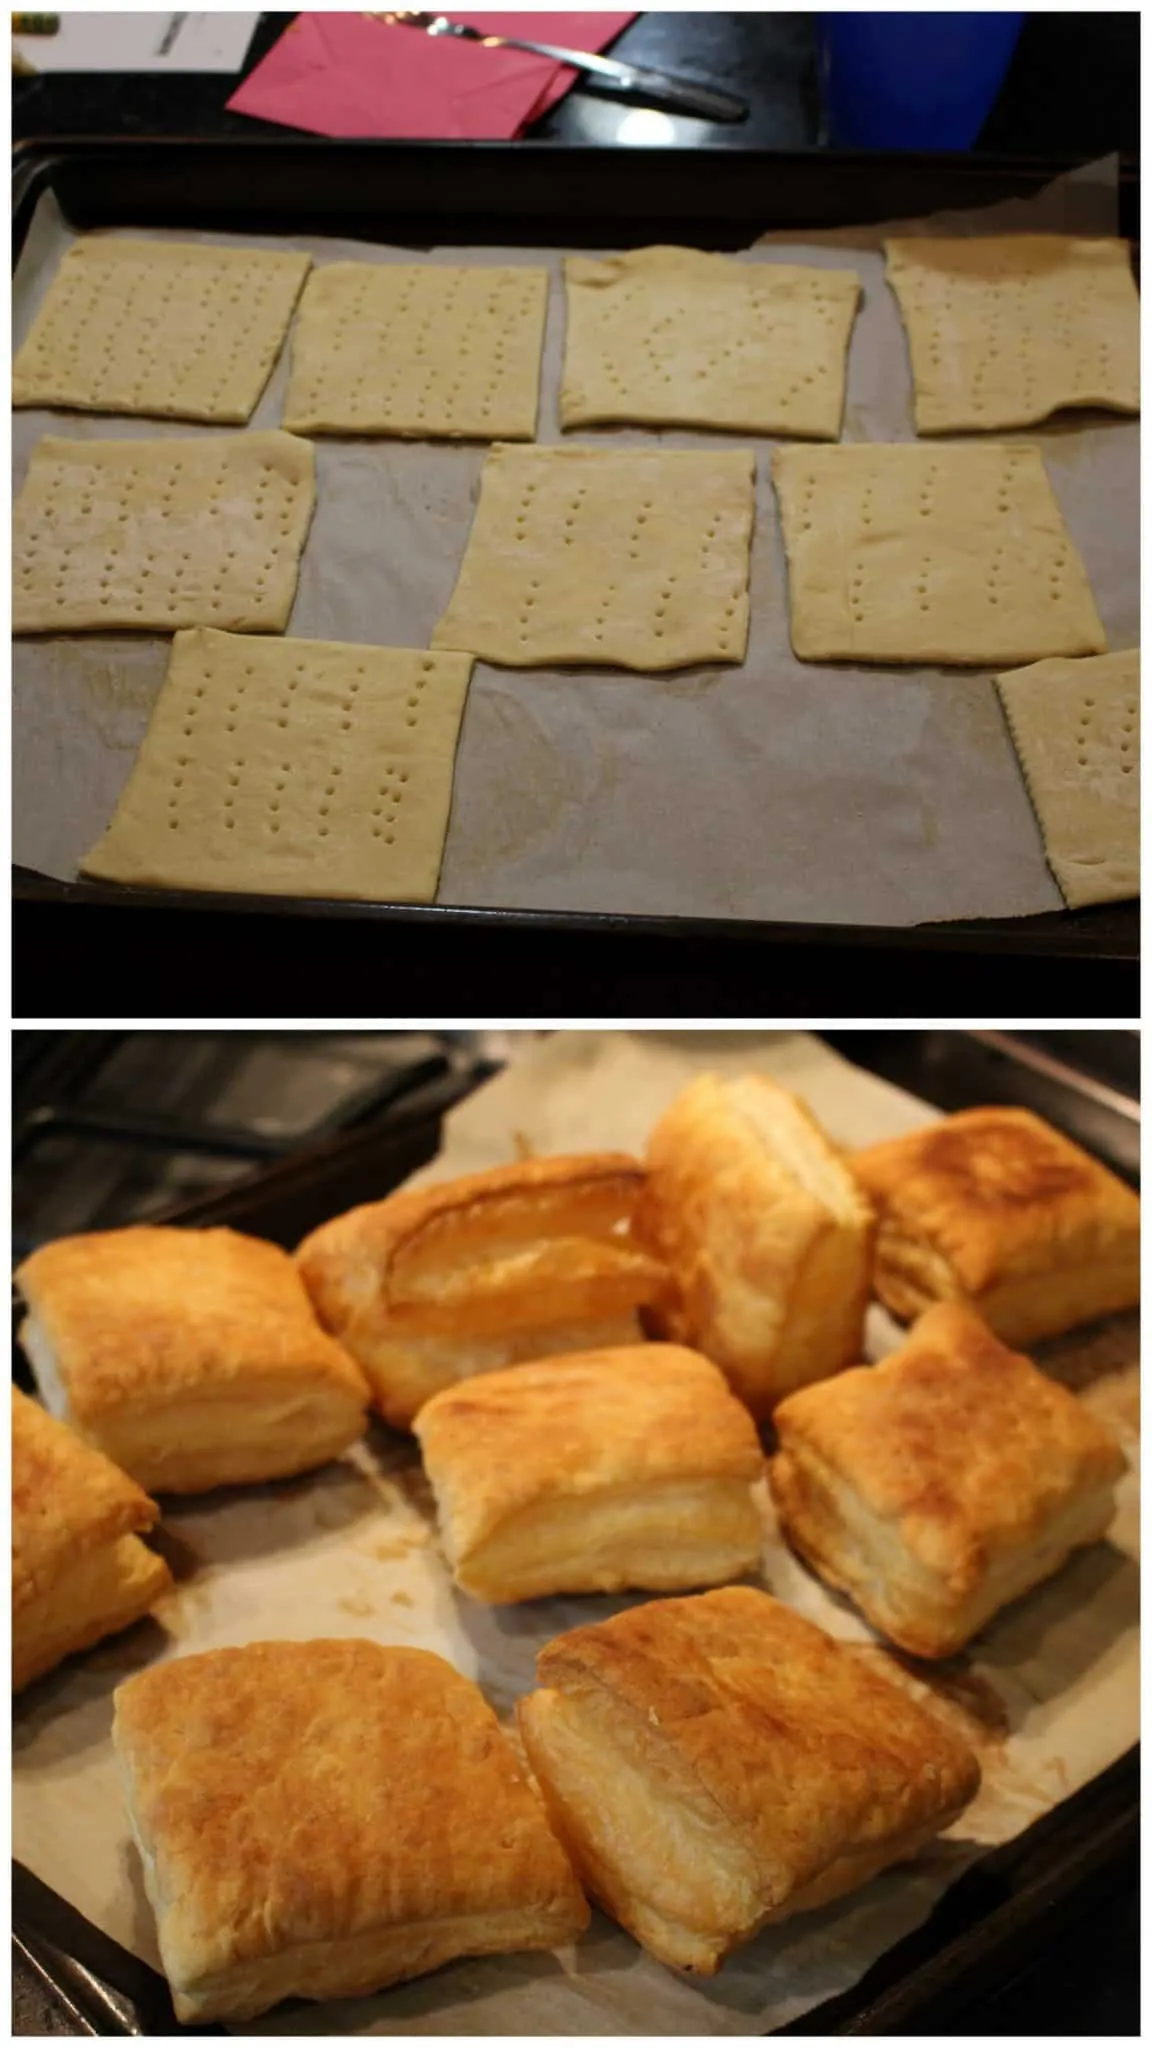 Cooking the puff pastry in the oven